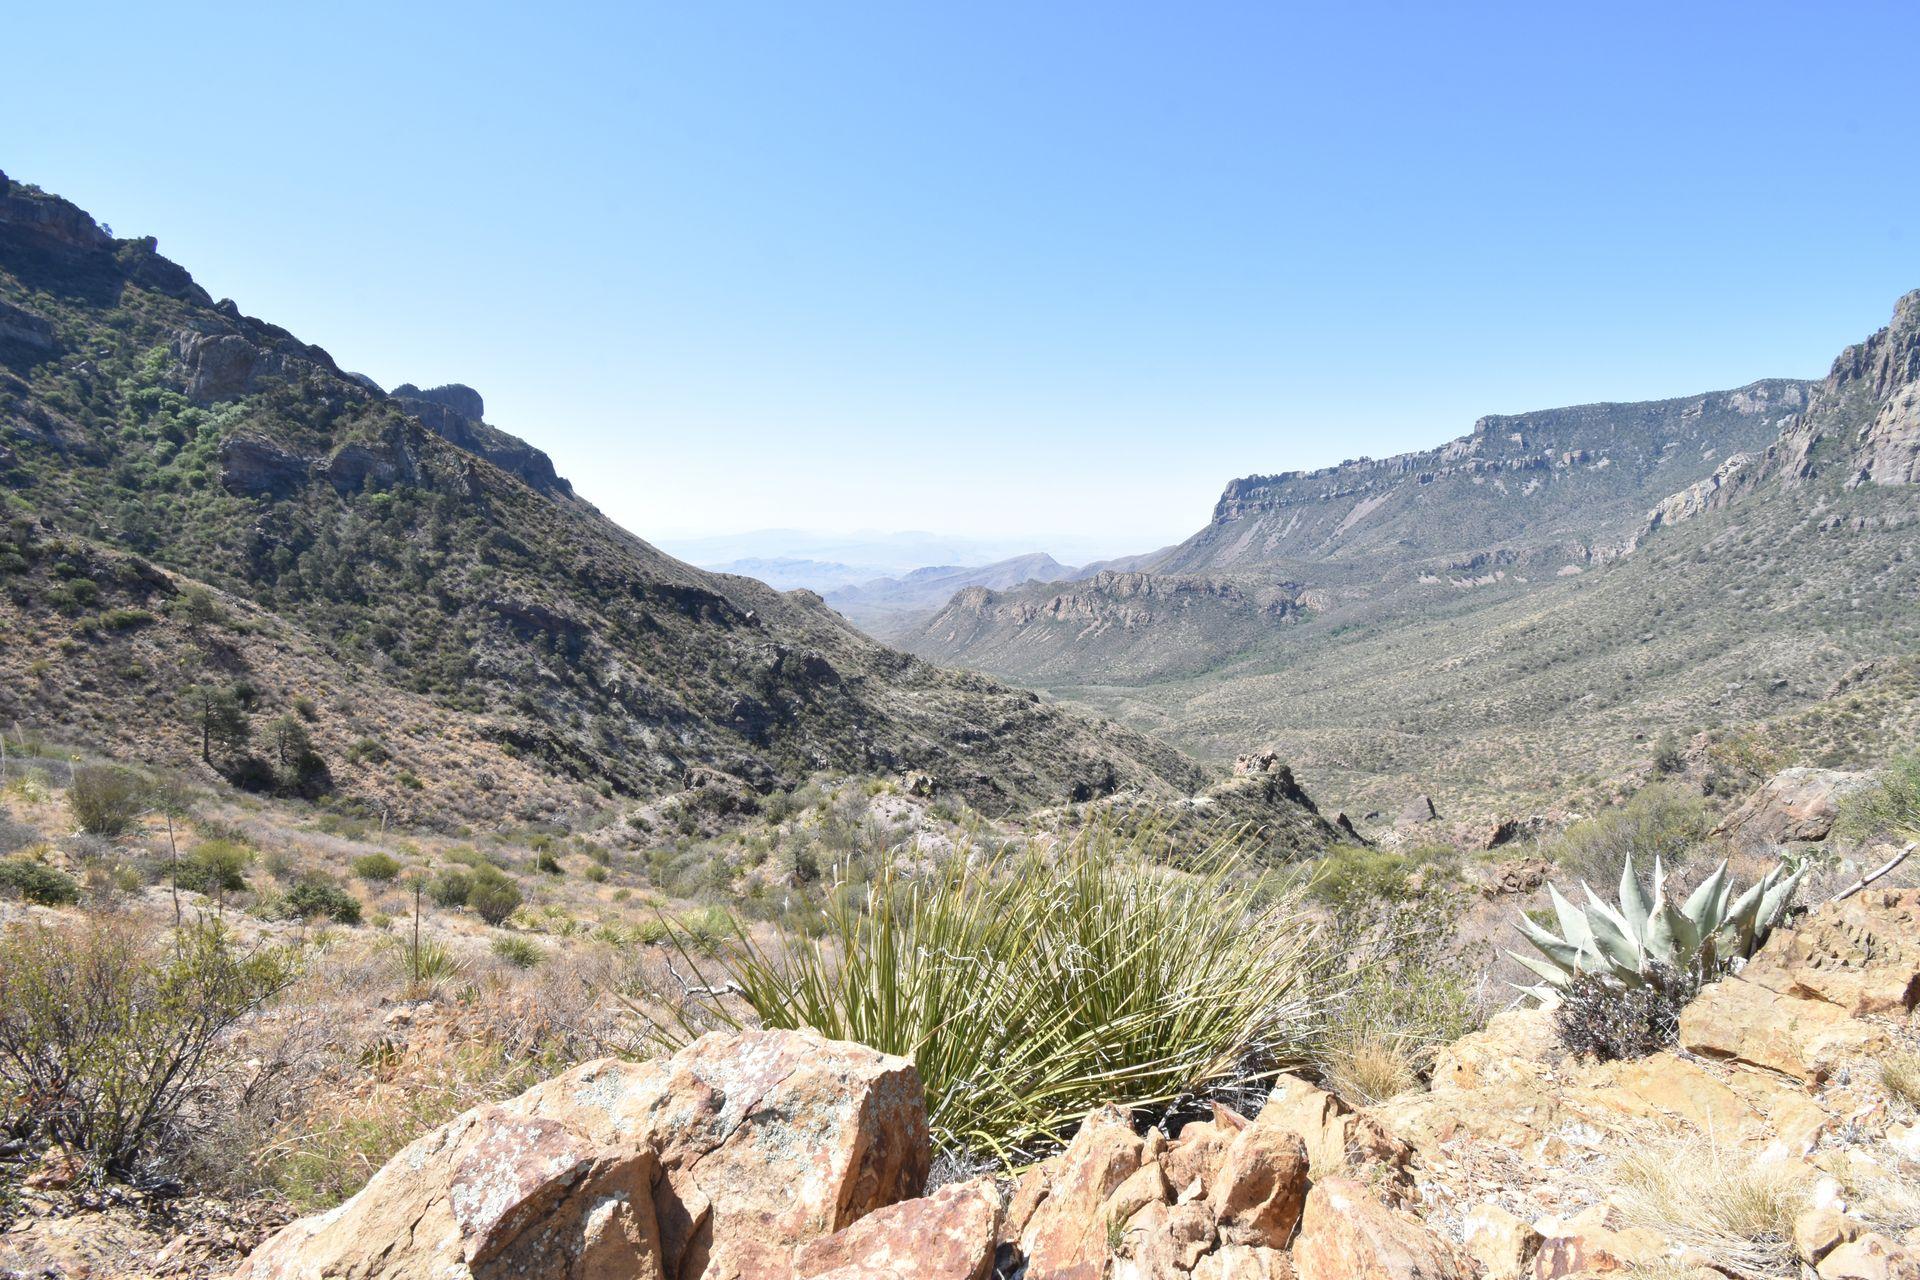 A view of desert mountains on the Lost Mine Trail.